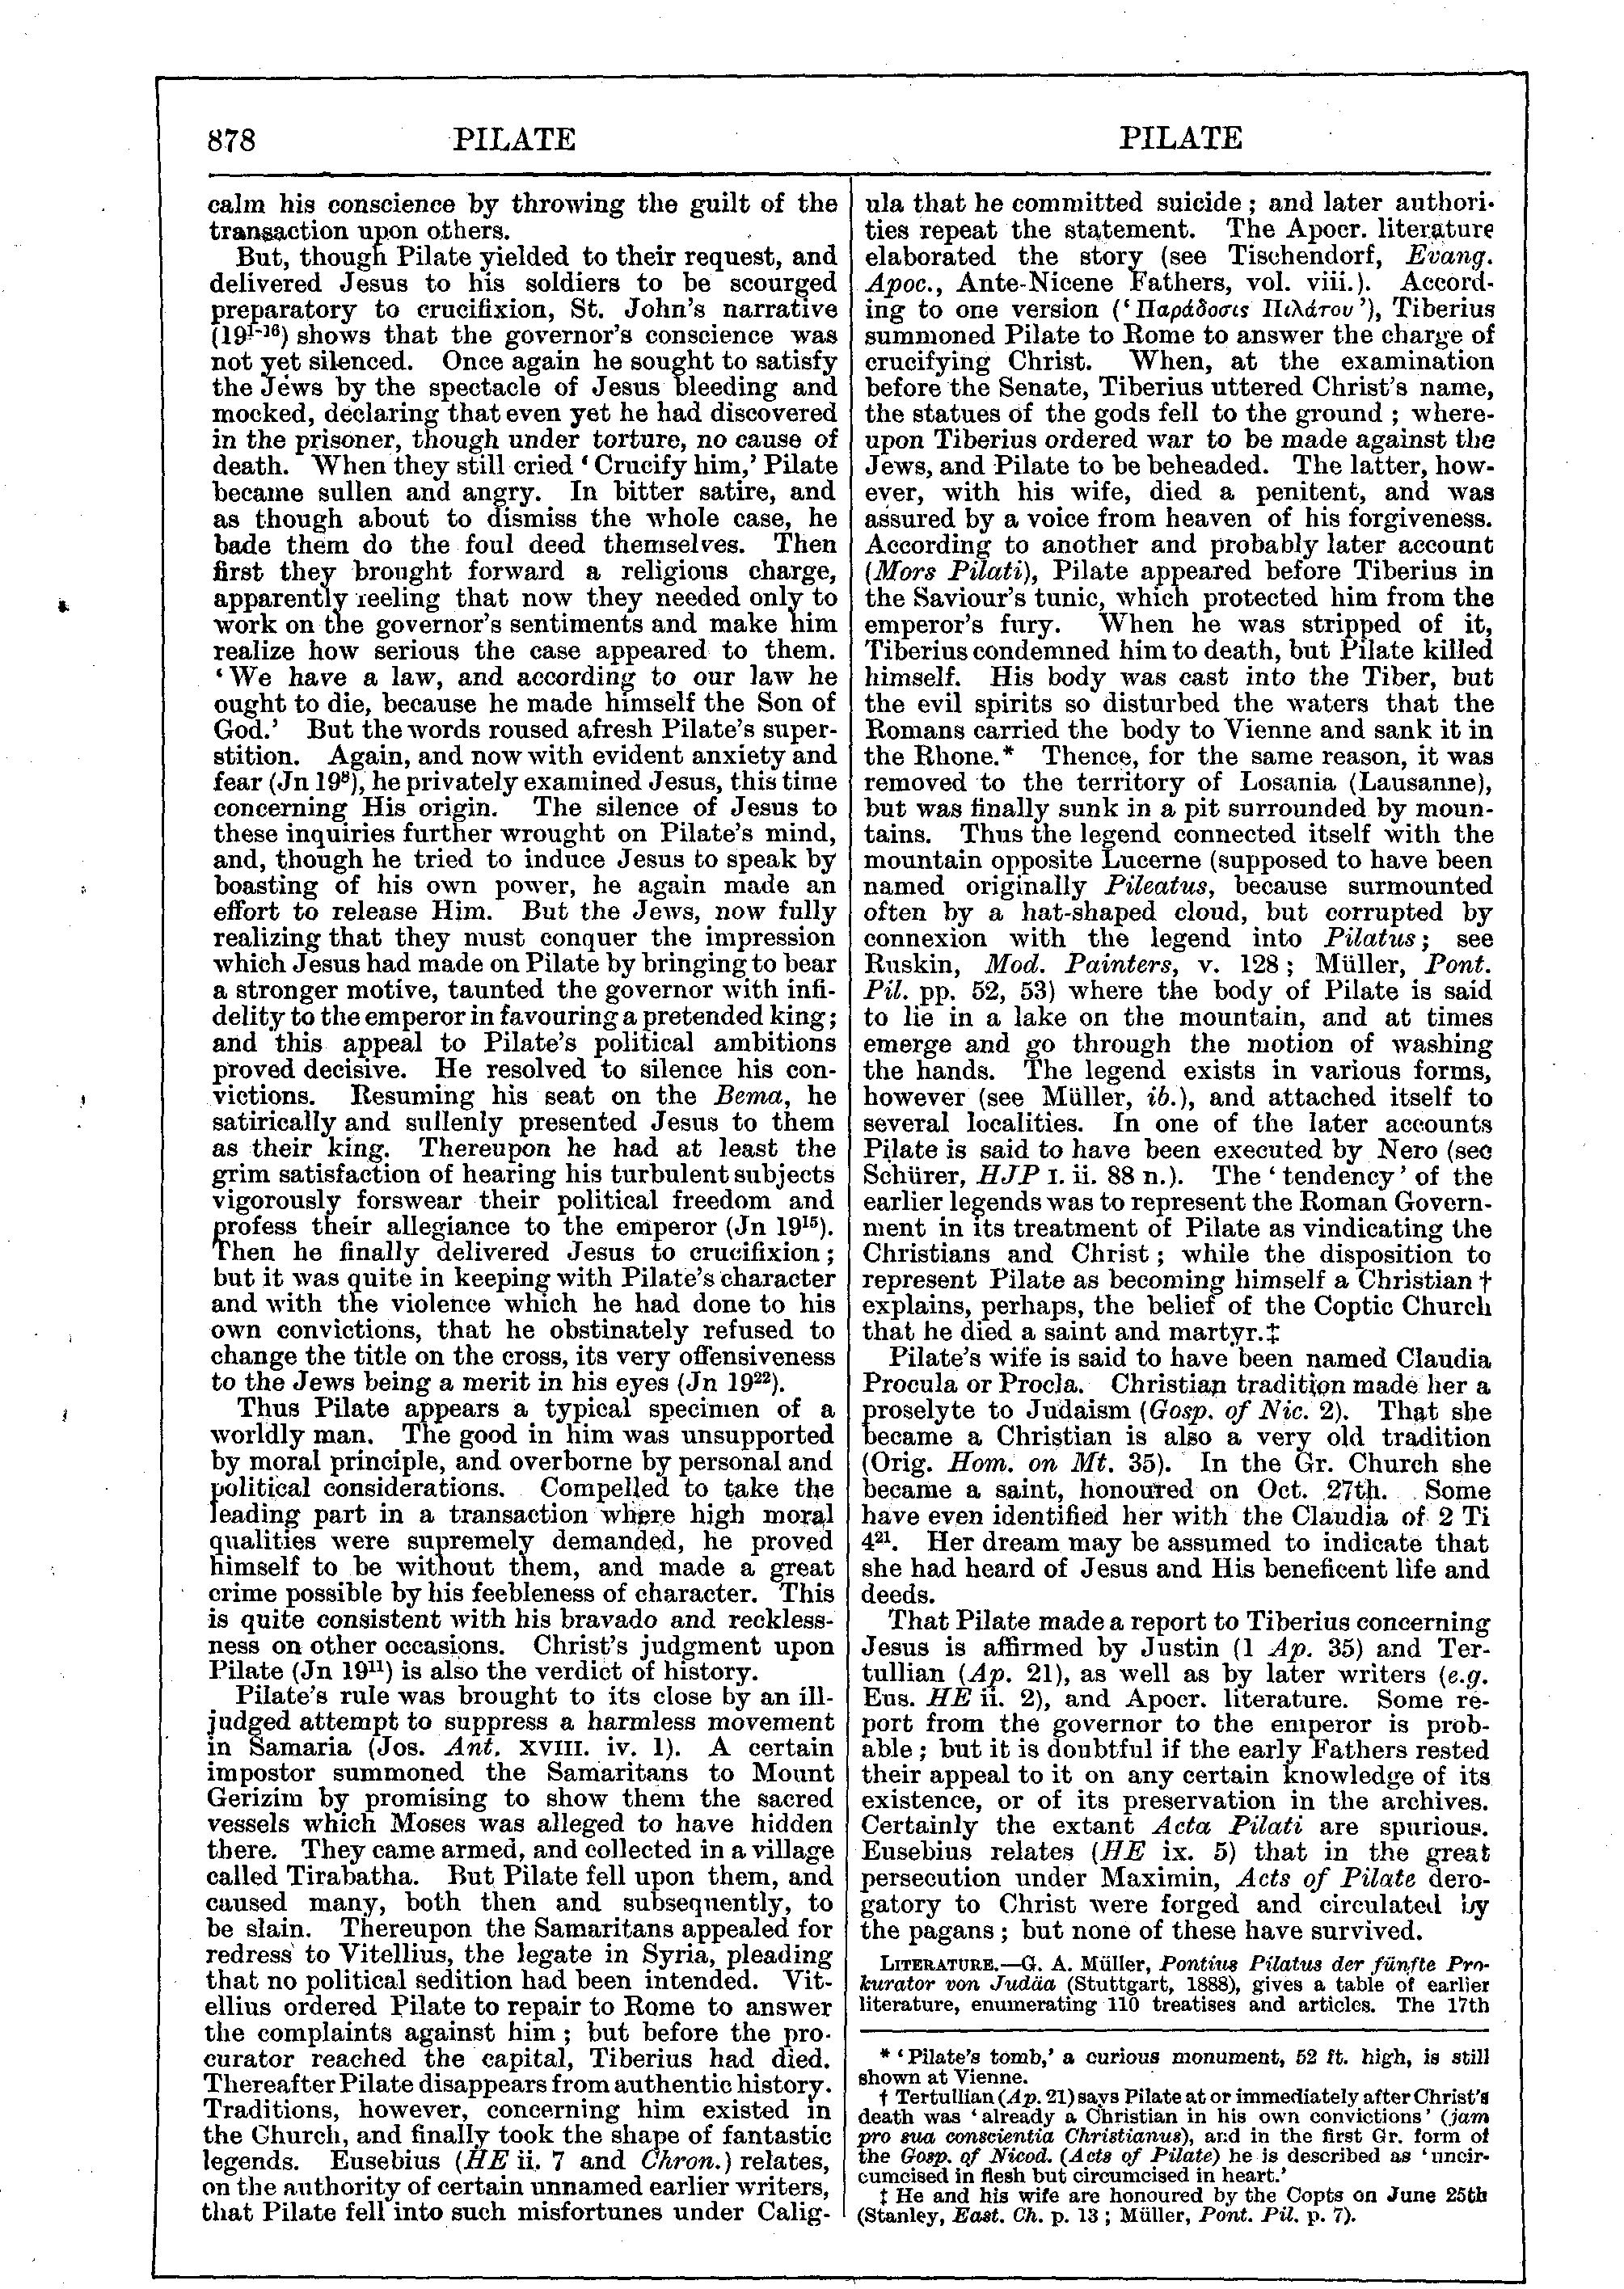 Image of page 878